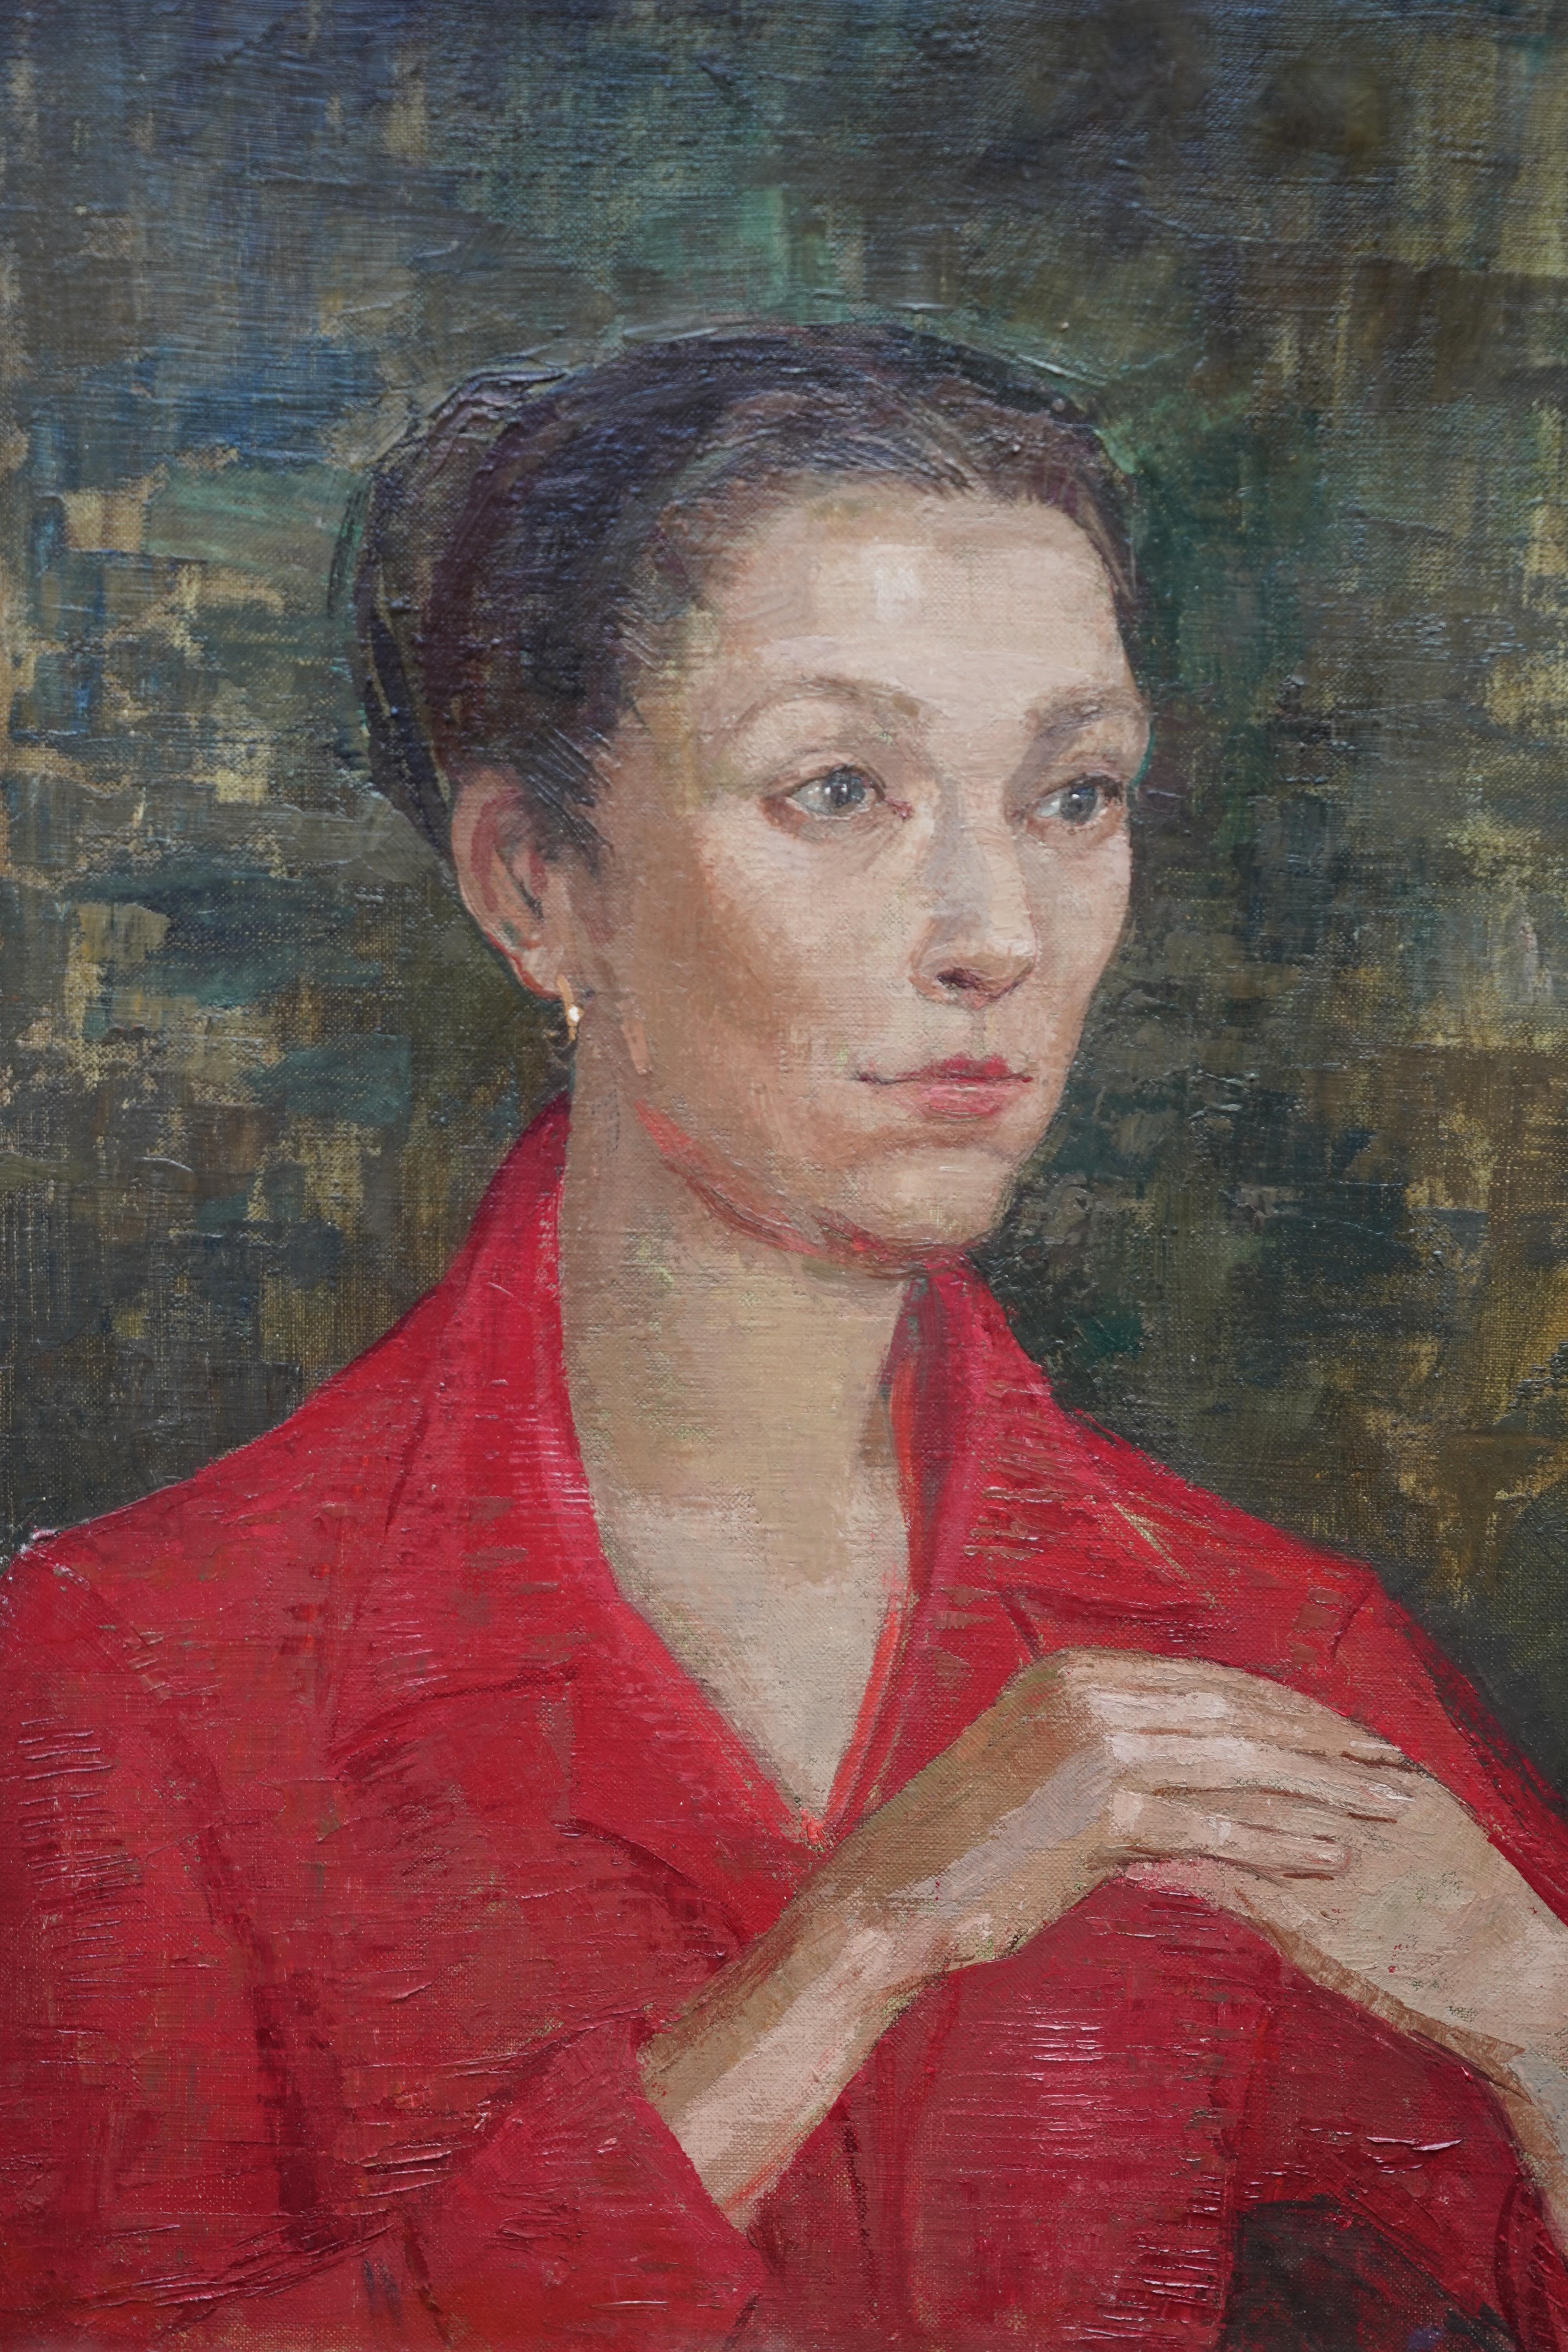 Lady in Red Portrait - British Post Impressionist 50s oil painting female artist - Realist Painting by Constance Anne Parker